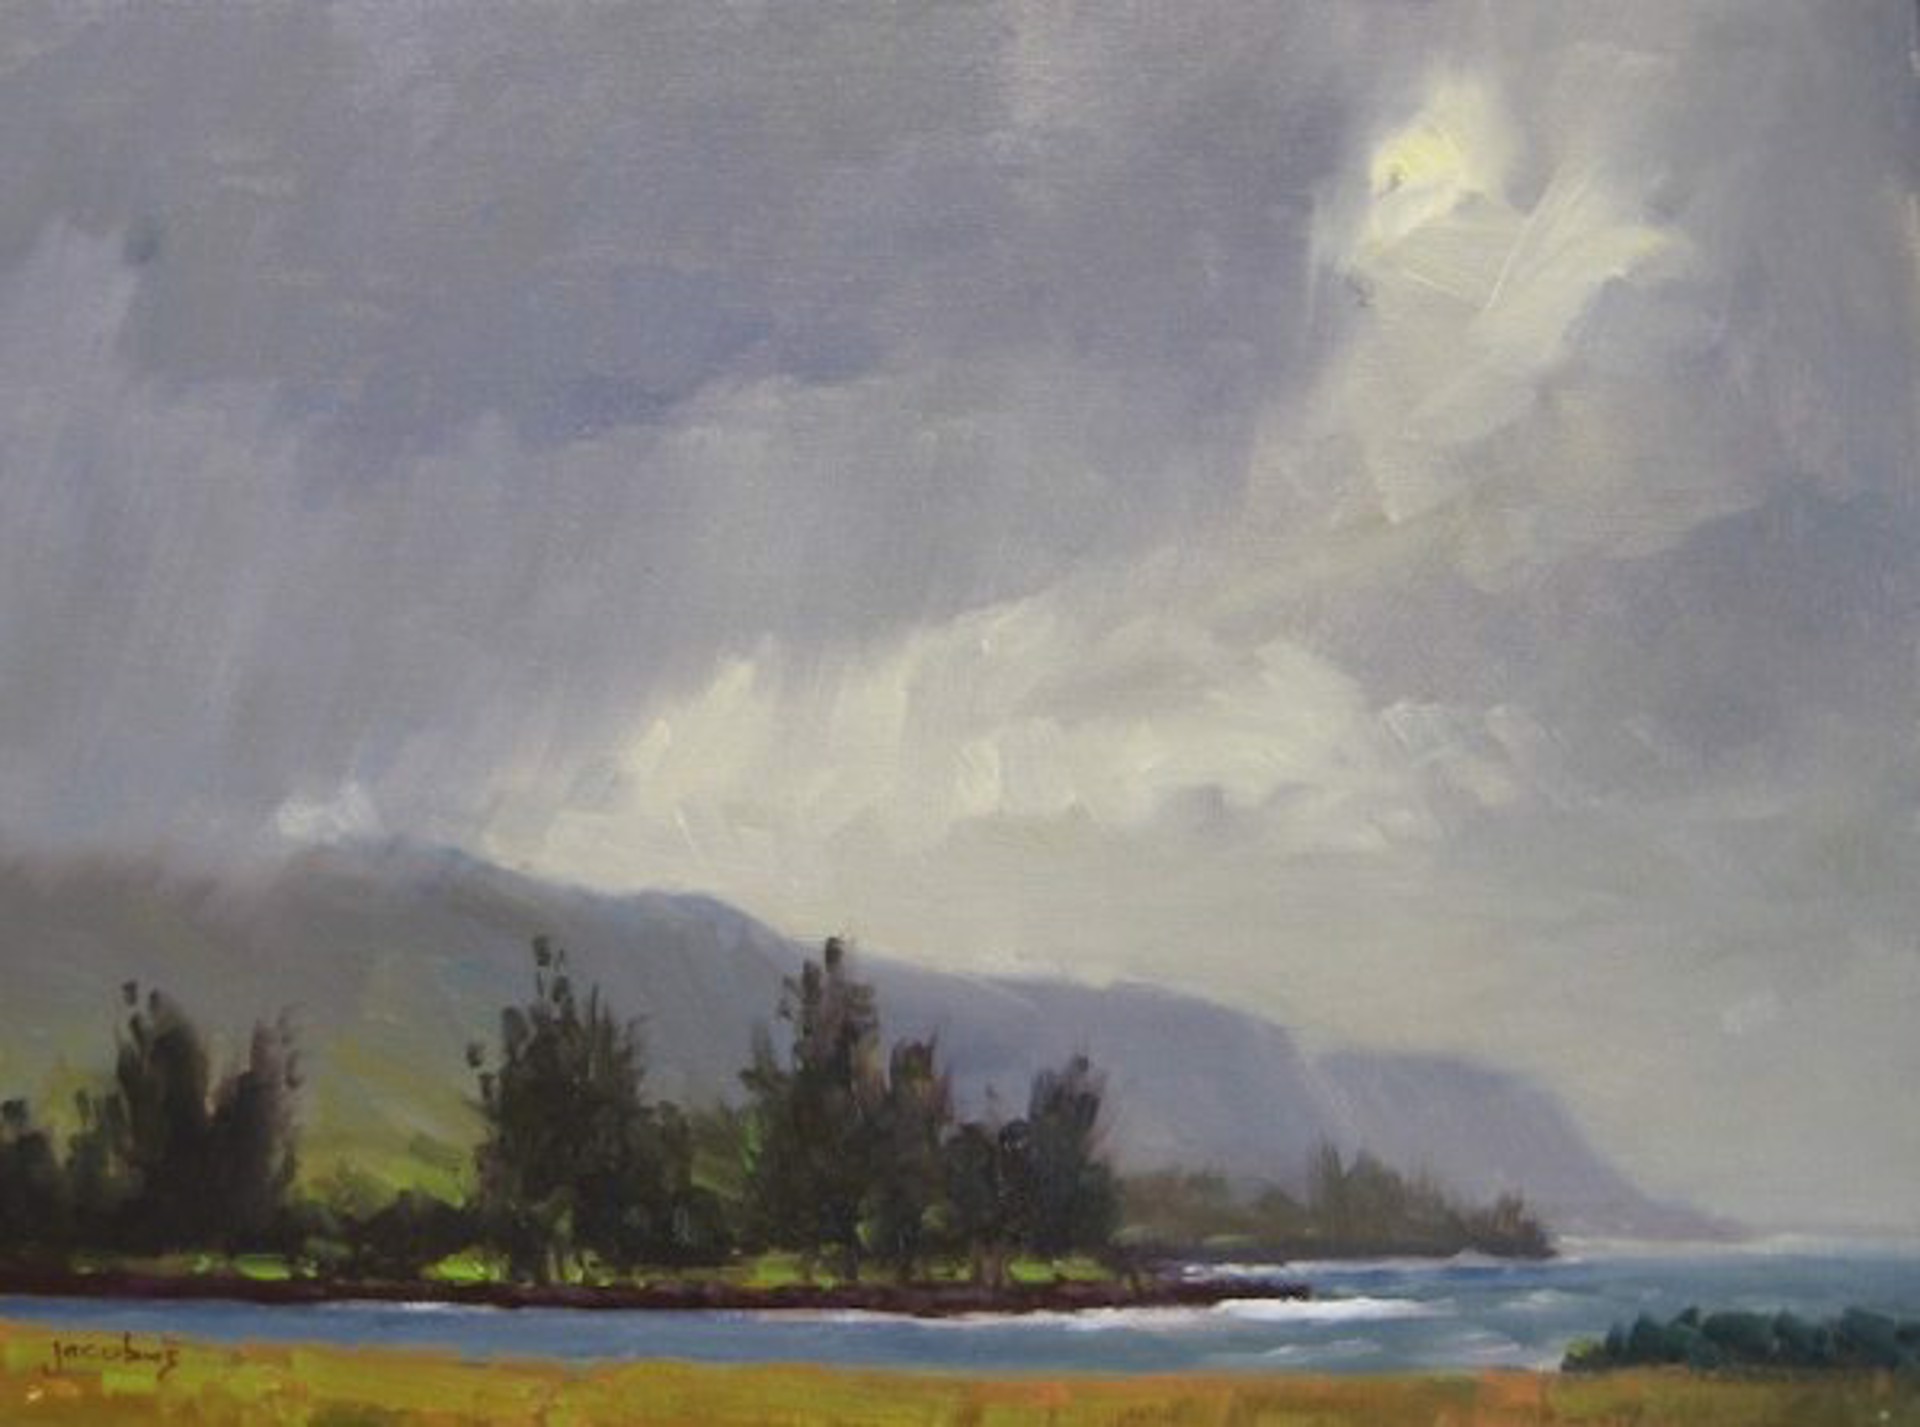 Storm Clouds Over Waialua by Jacobus Baas